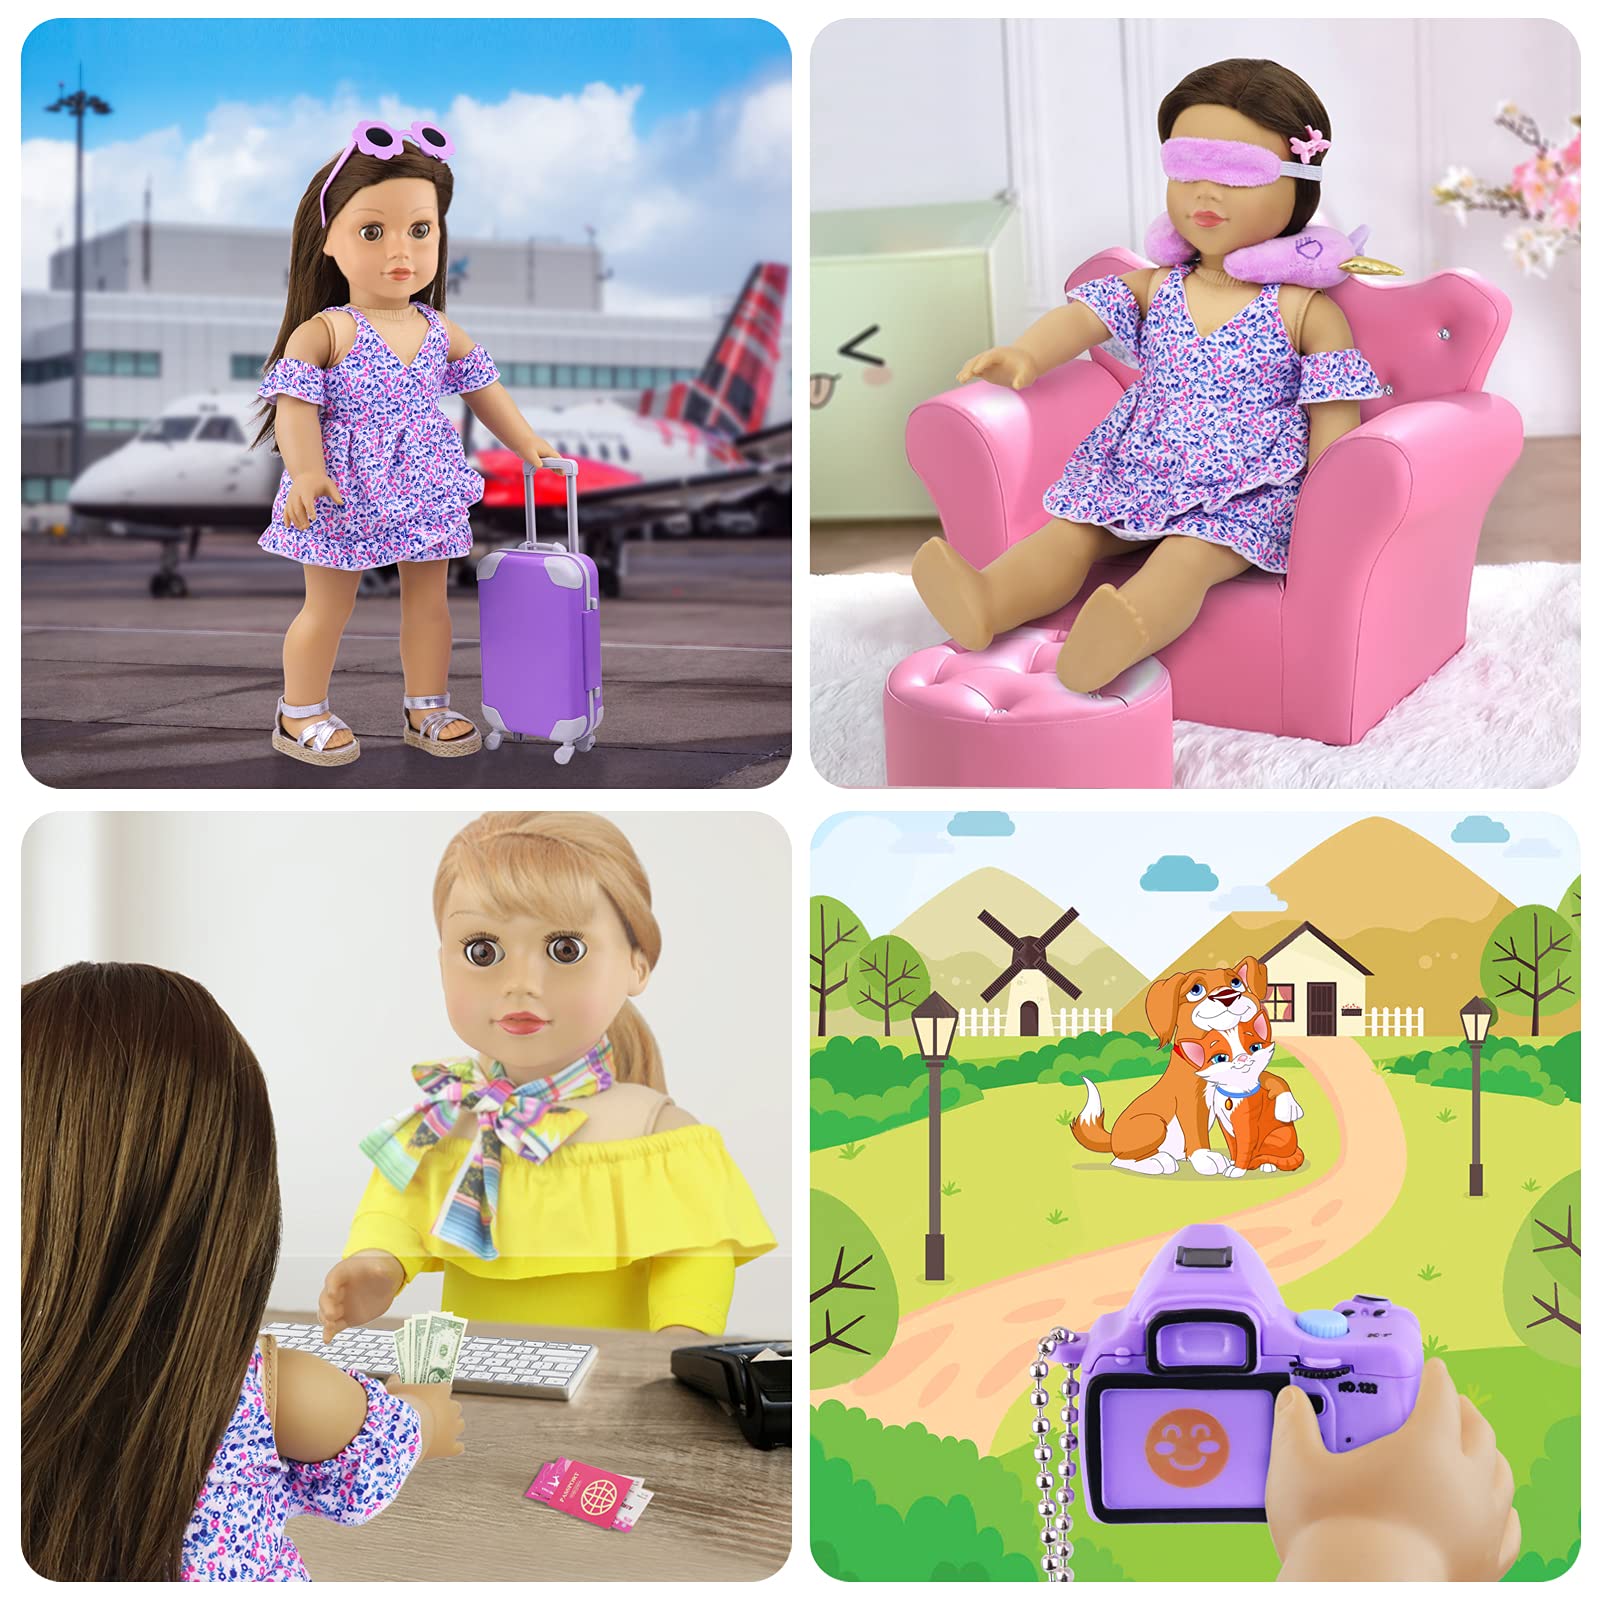 K.T. Fancy 16 pcs American 18 Doll Accessories Suitcase Travel Luggage Play Set for 18 Inch Doll Travel Carrier, Sunglasses Camera Computer Phone Pad Travel Pillow Blindfold Passport Tickets Cashes